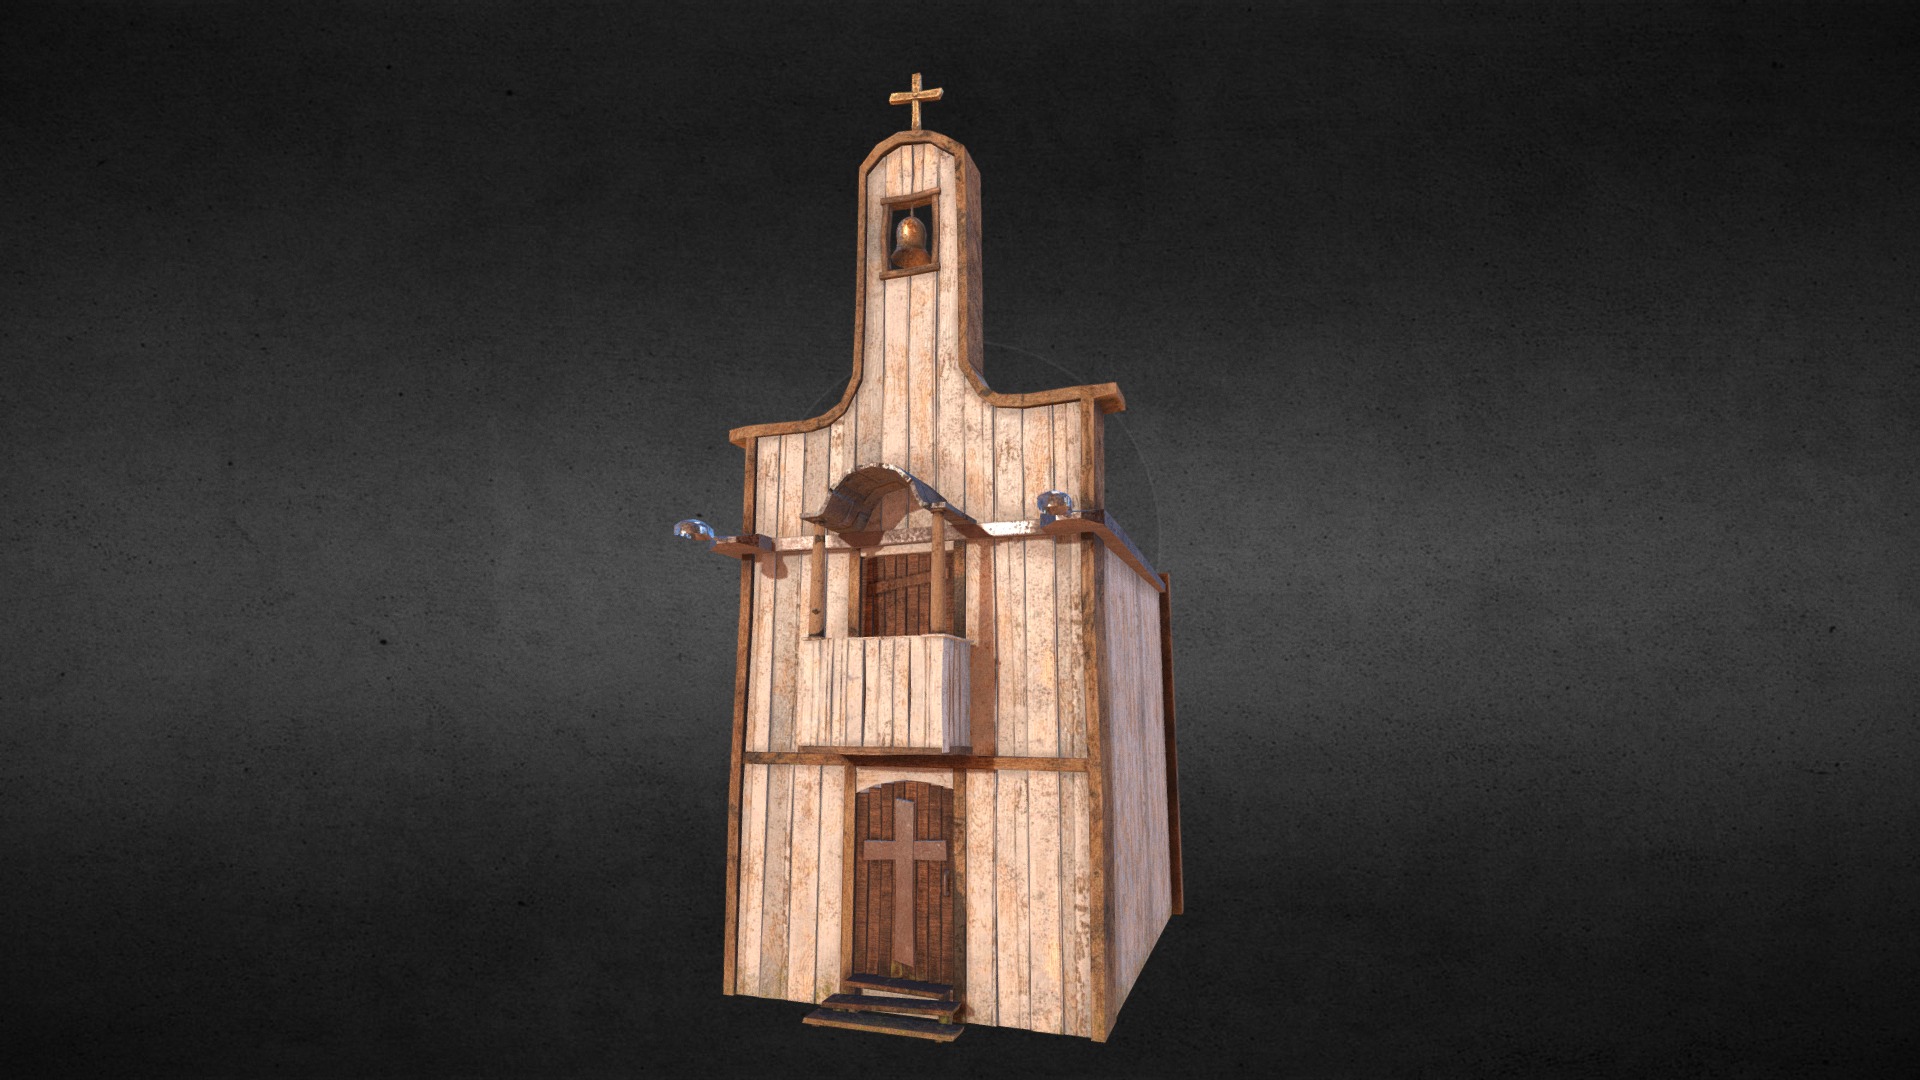 3D model Western Church - This is a 3D model of the Western Church. The 3D model is about a wooden tower with a cross on top.